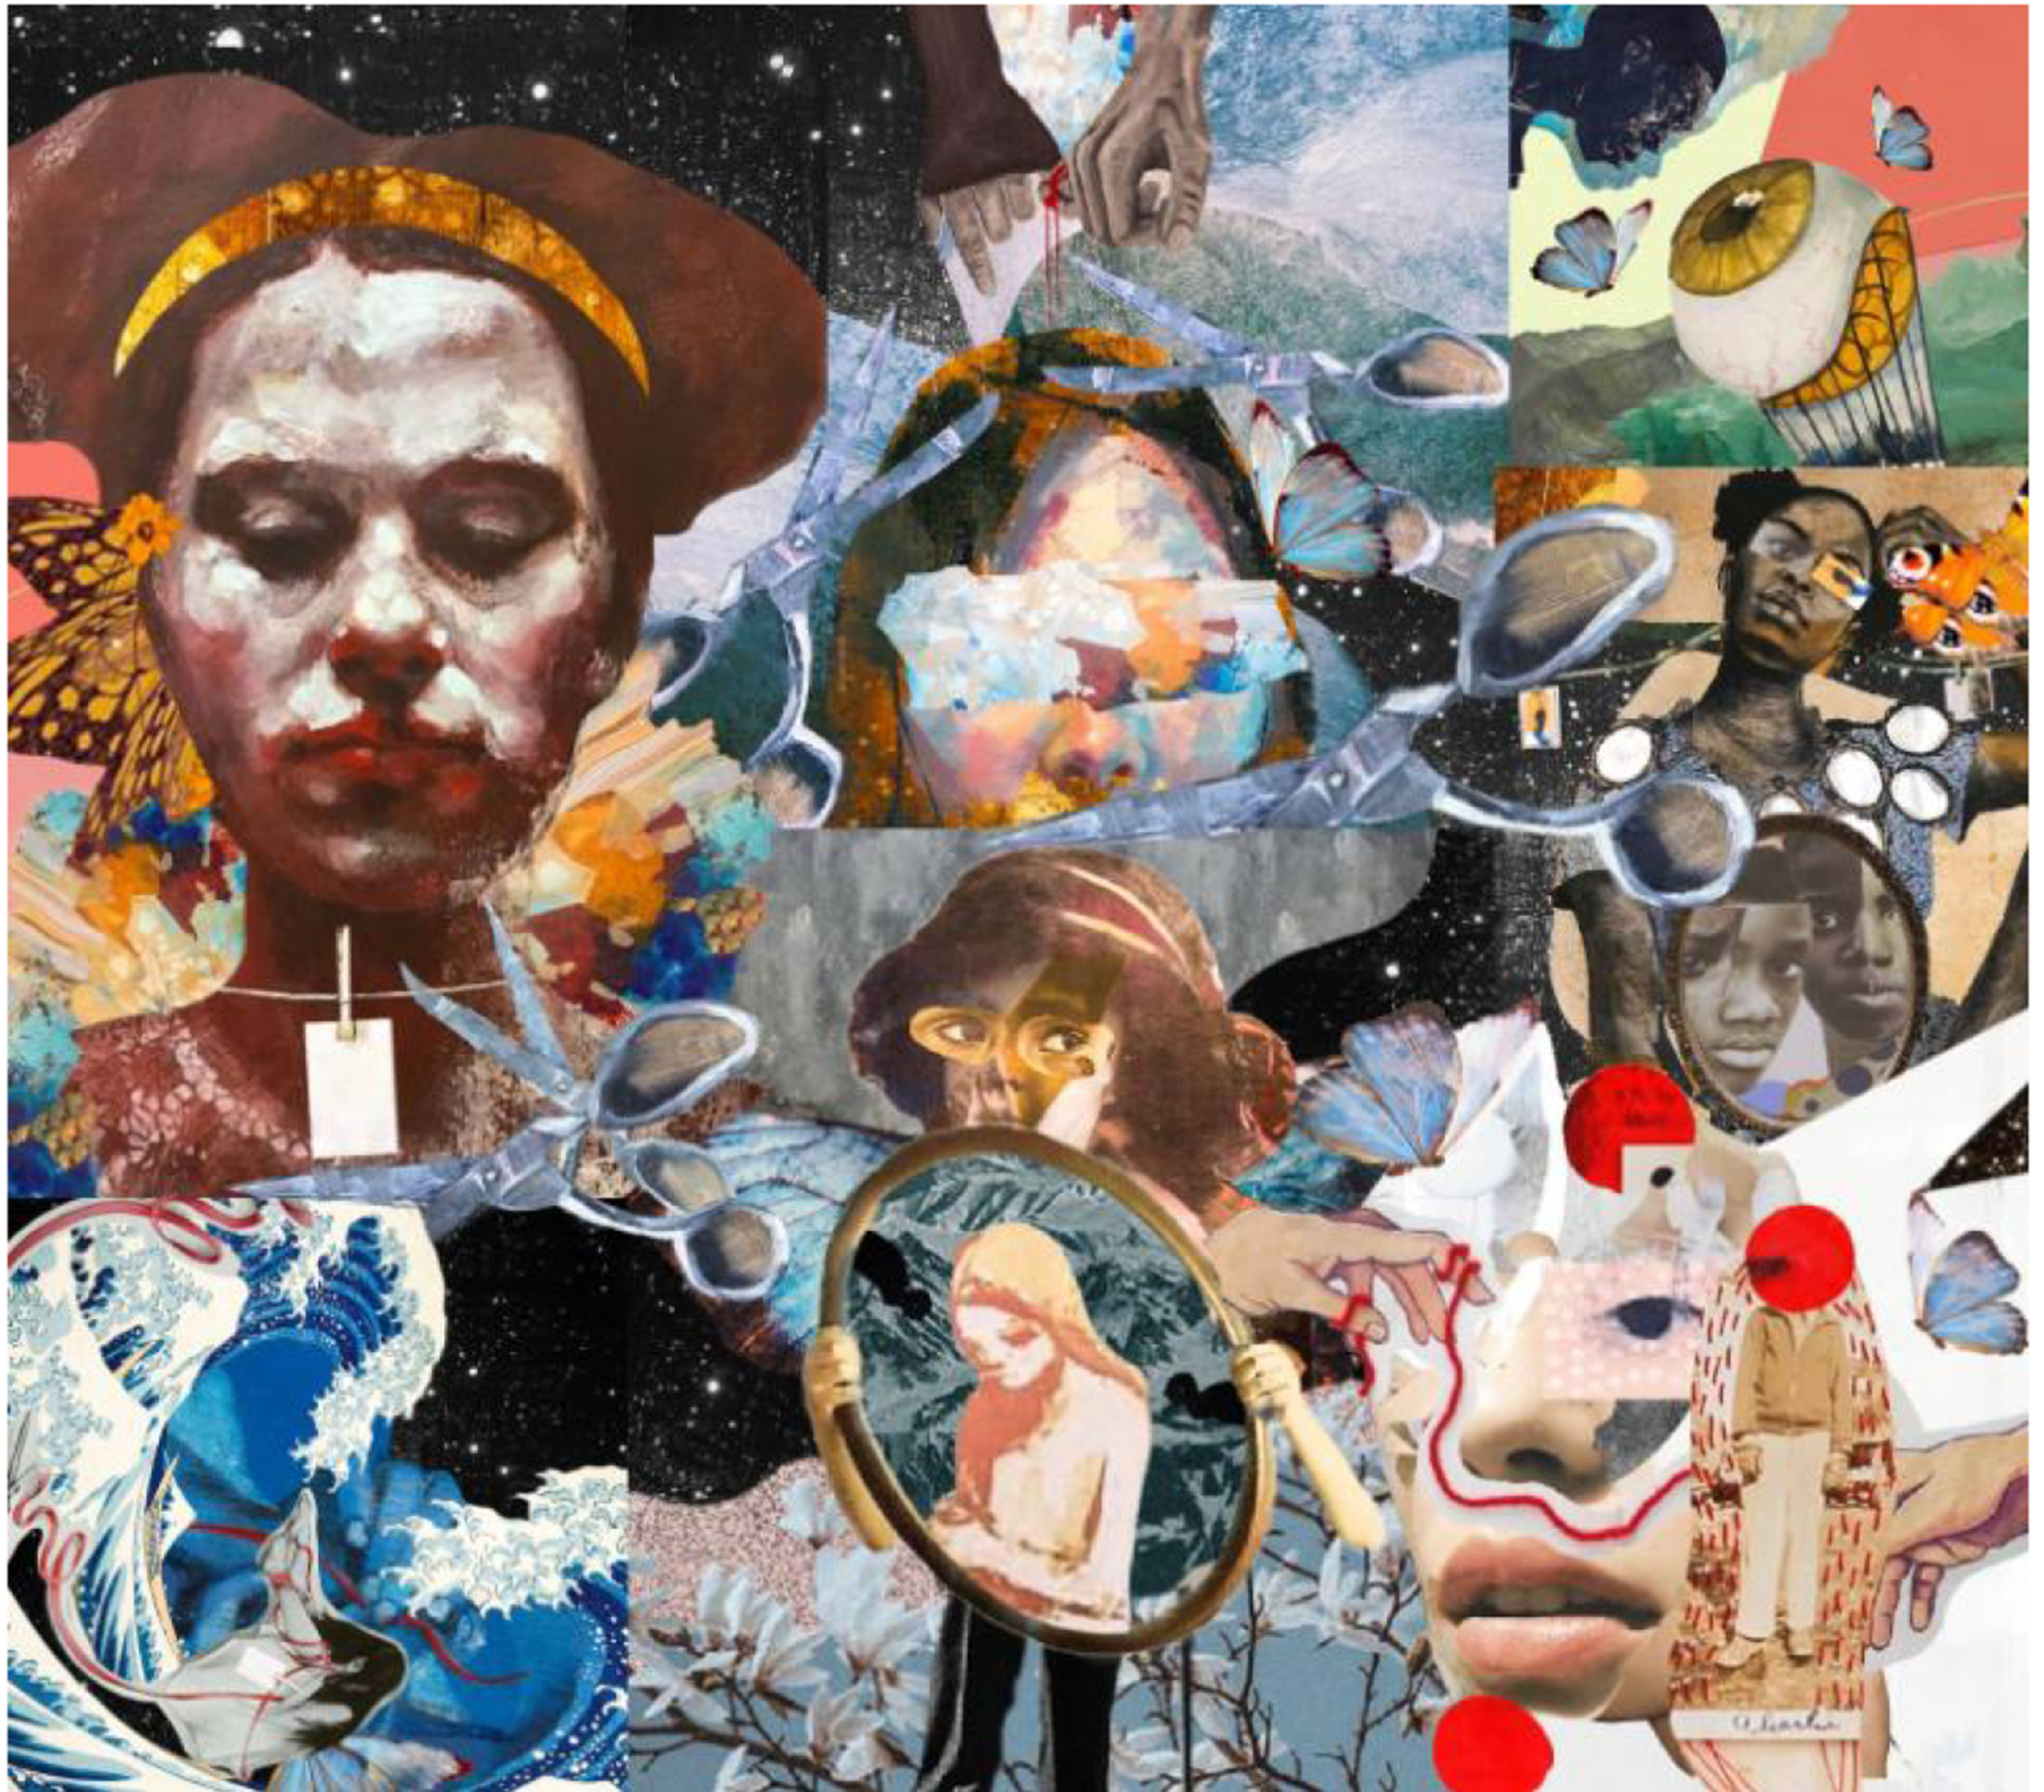 Illustrative collage depicting an abstract scene of people, places, and events